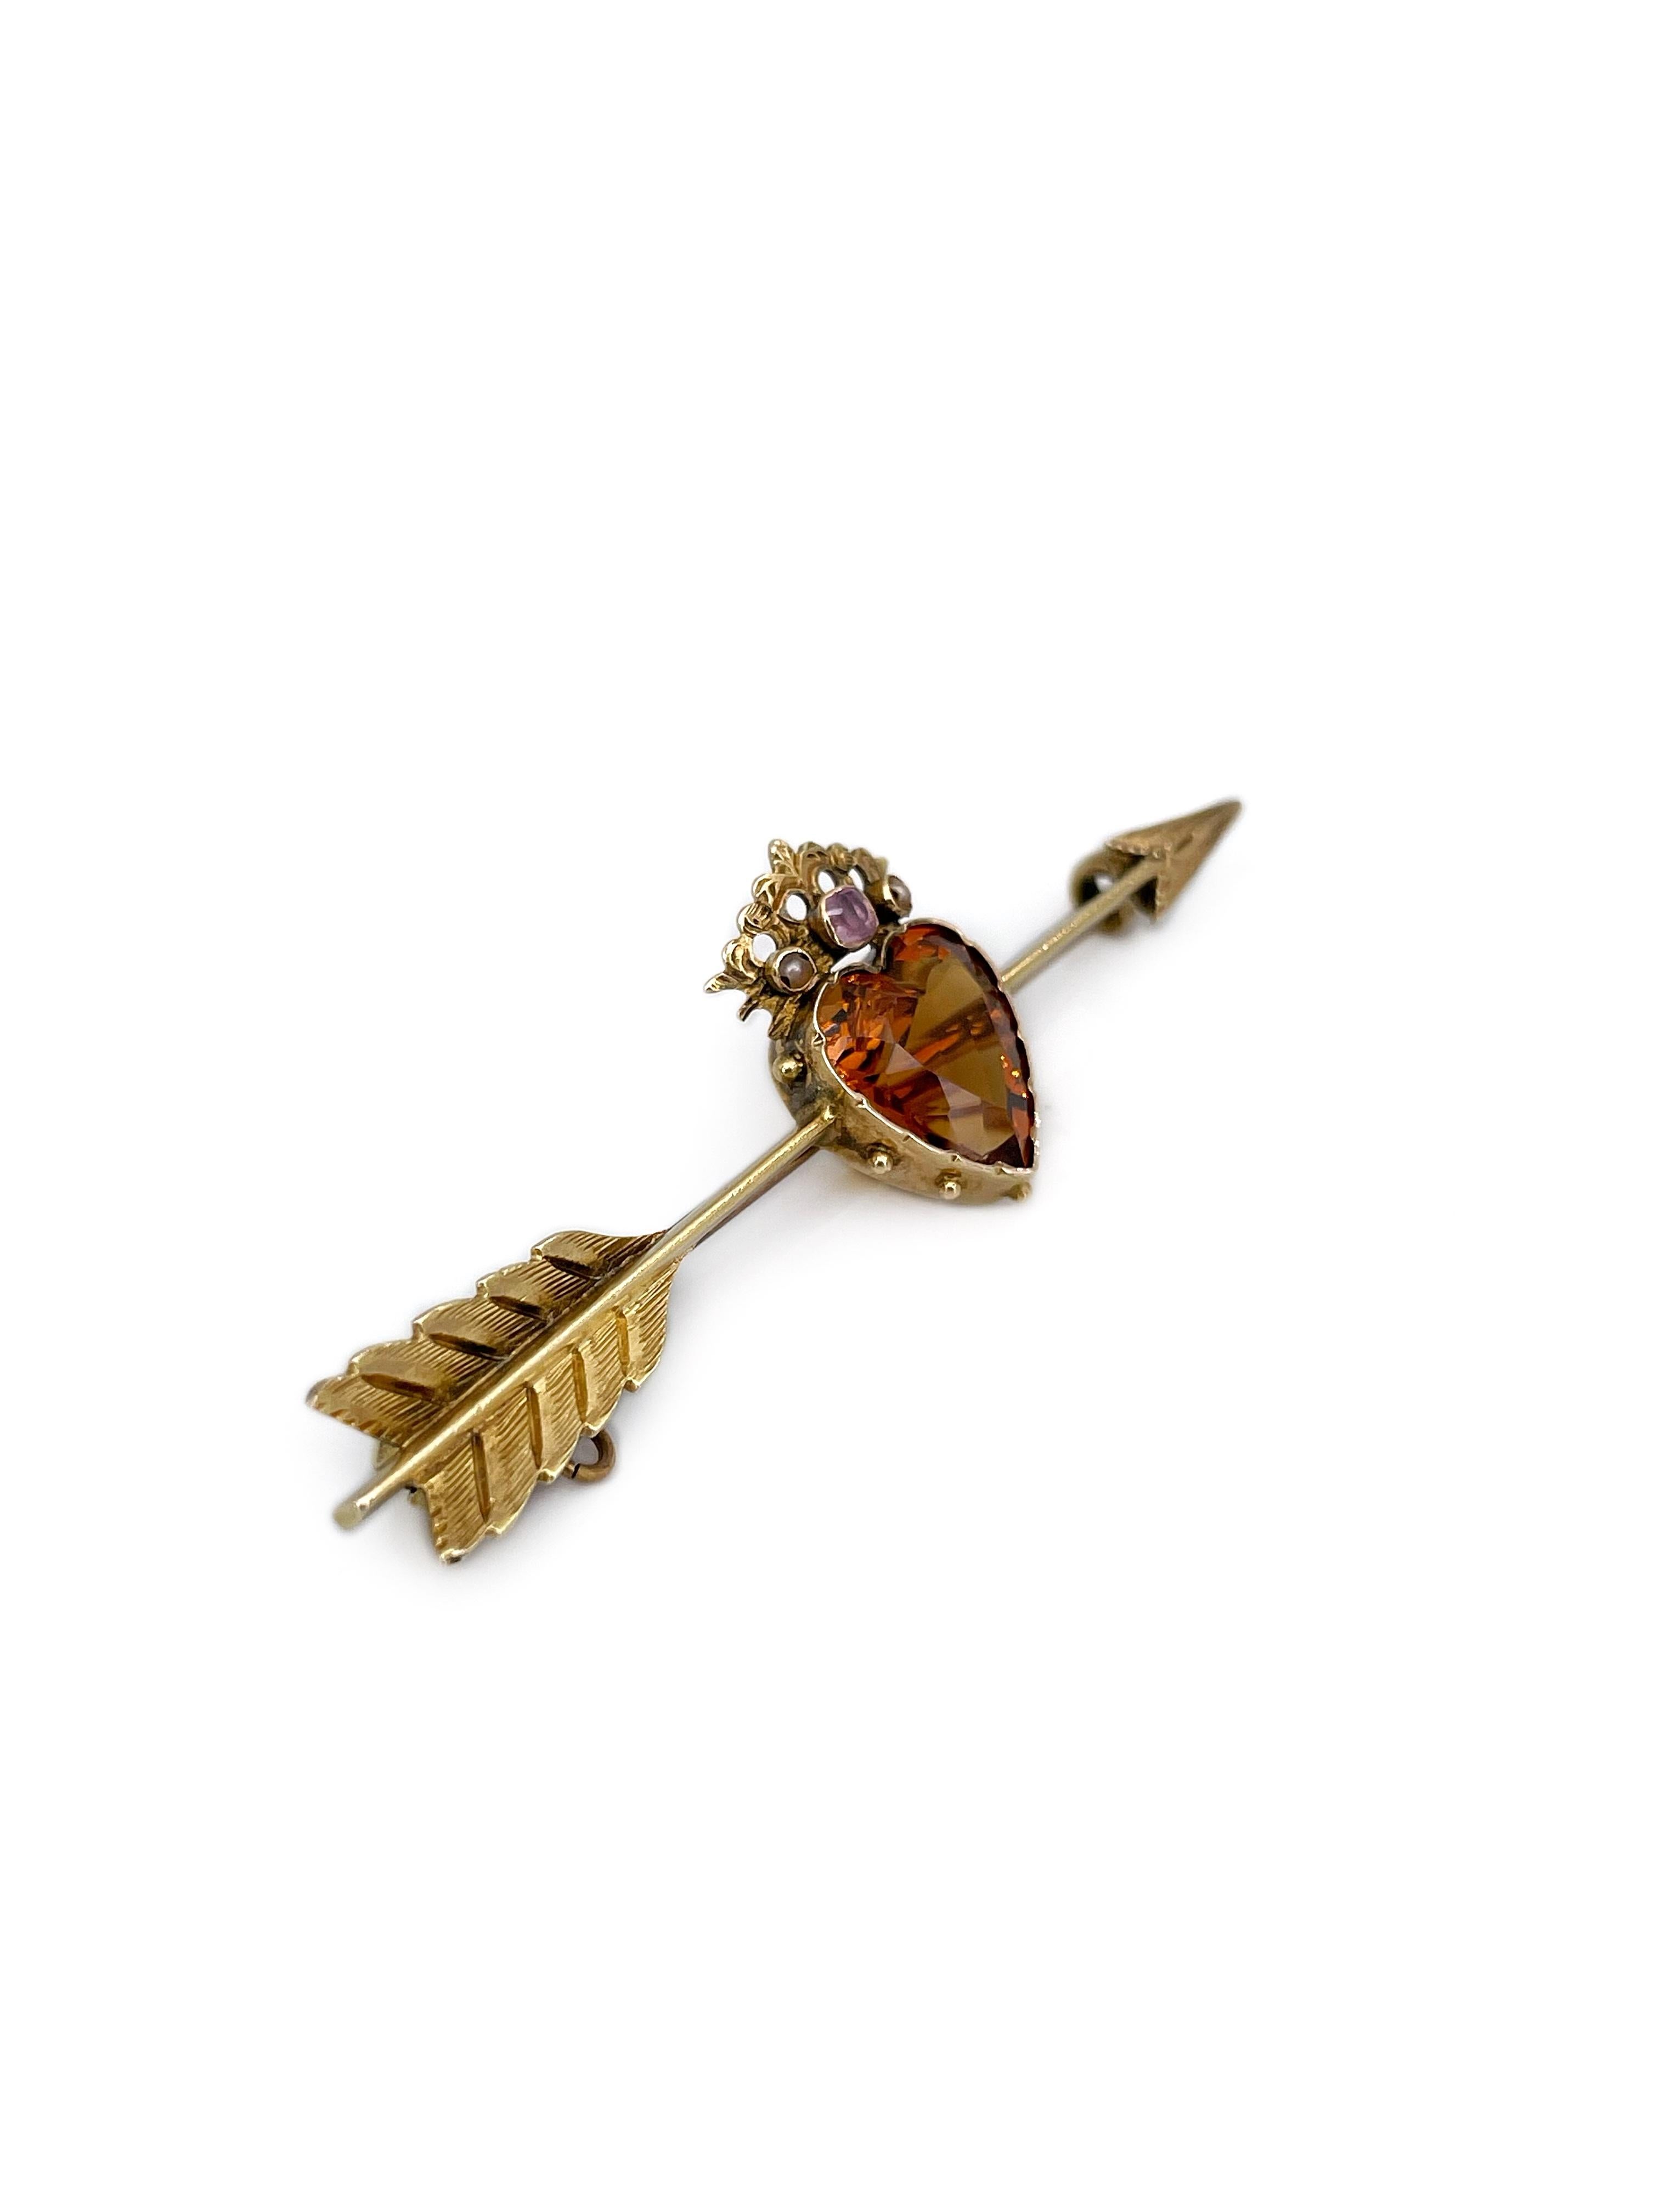 This is a magnificent antique Victorian arrow bar brooch crafted in 9K yellow gold. The piece features beautiful heart cut Madeira citrine. The crown is adorned with two seed pearls and a ruby. 

Weight: 3.04g
Length: 5cm
Heart: 1.5x0.8cm

———

If